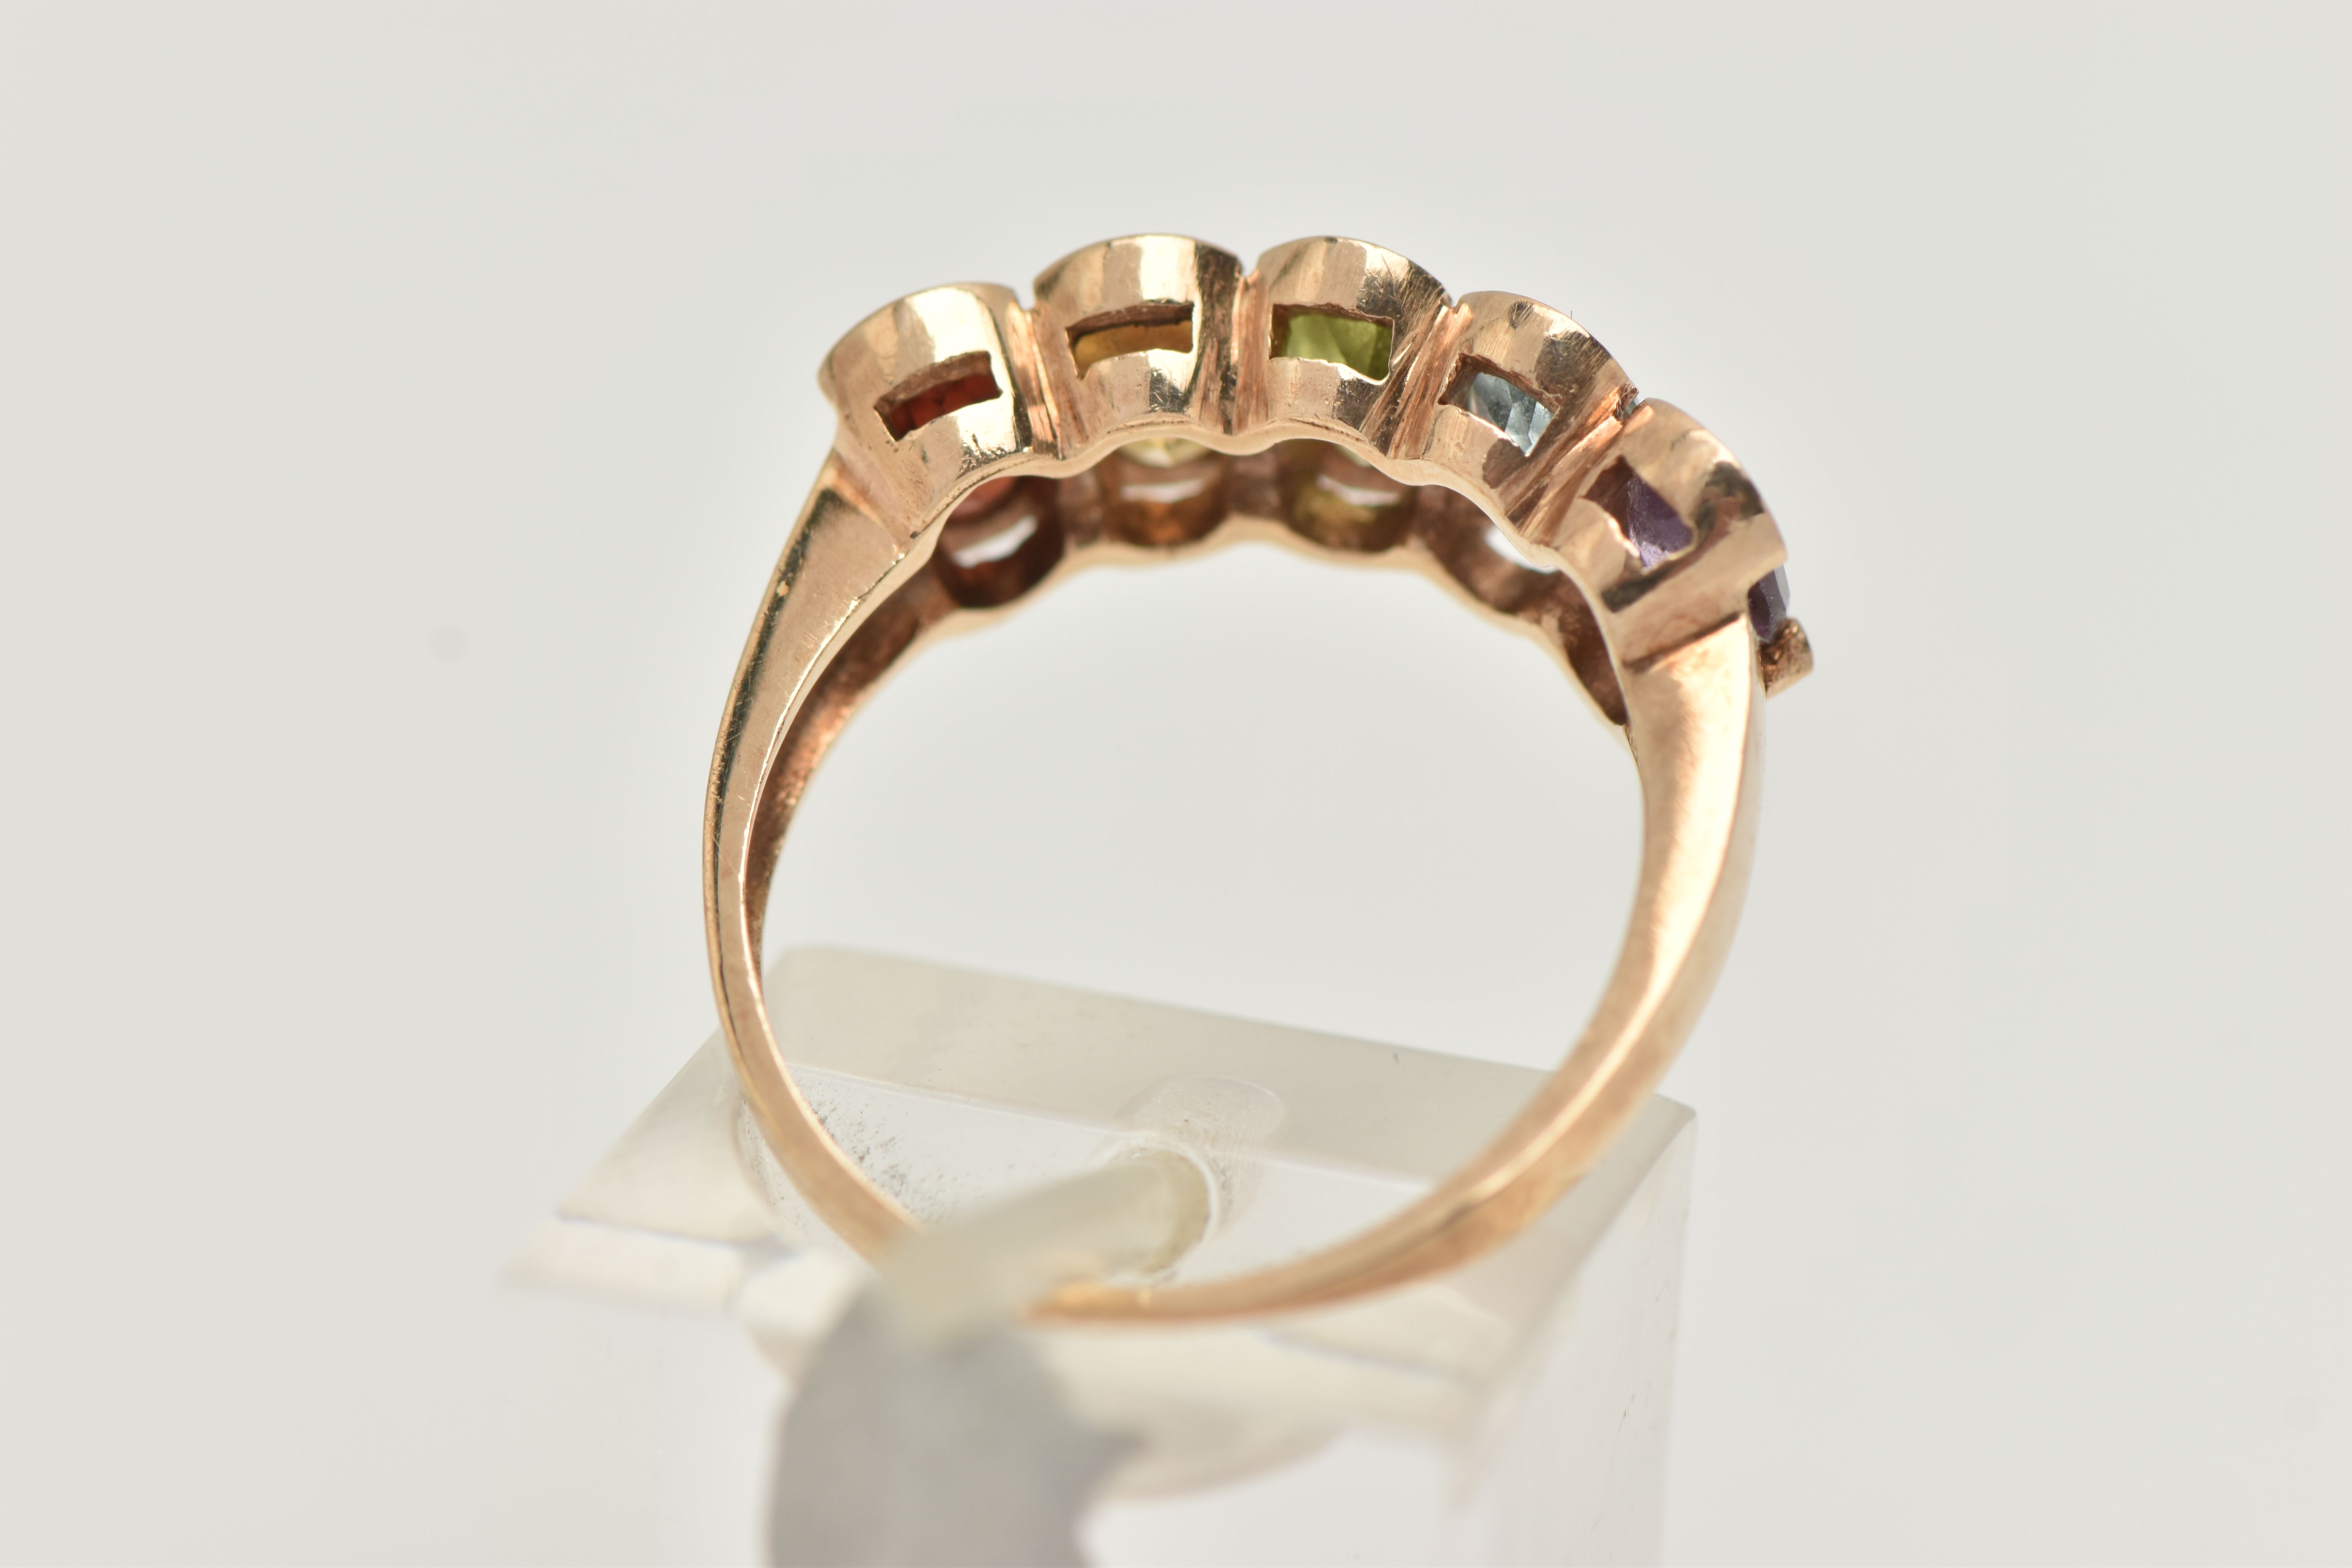 A 9CT GOLD MULTI GEM SET RING, designed as a row of five oval cut stones to include garnet, citrine, - Image 3 of 4